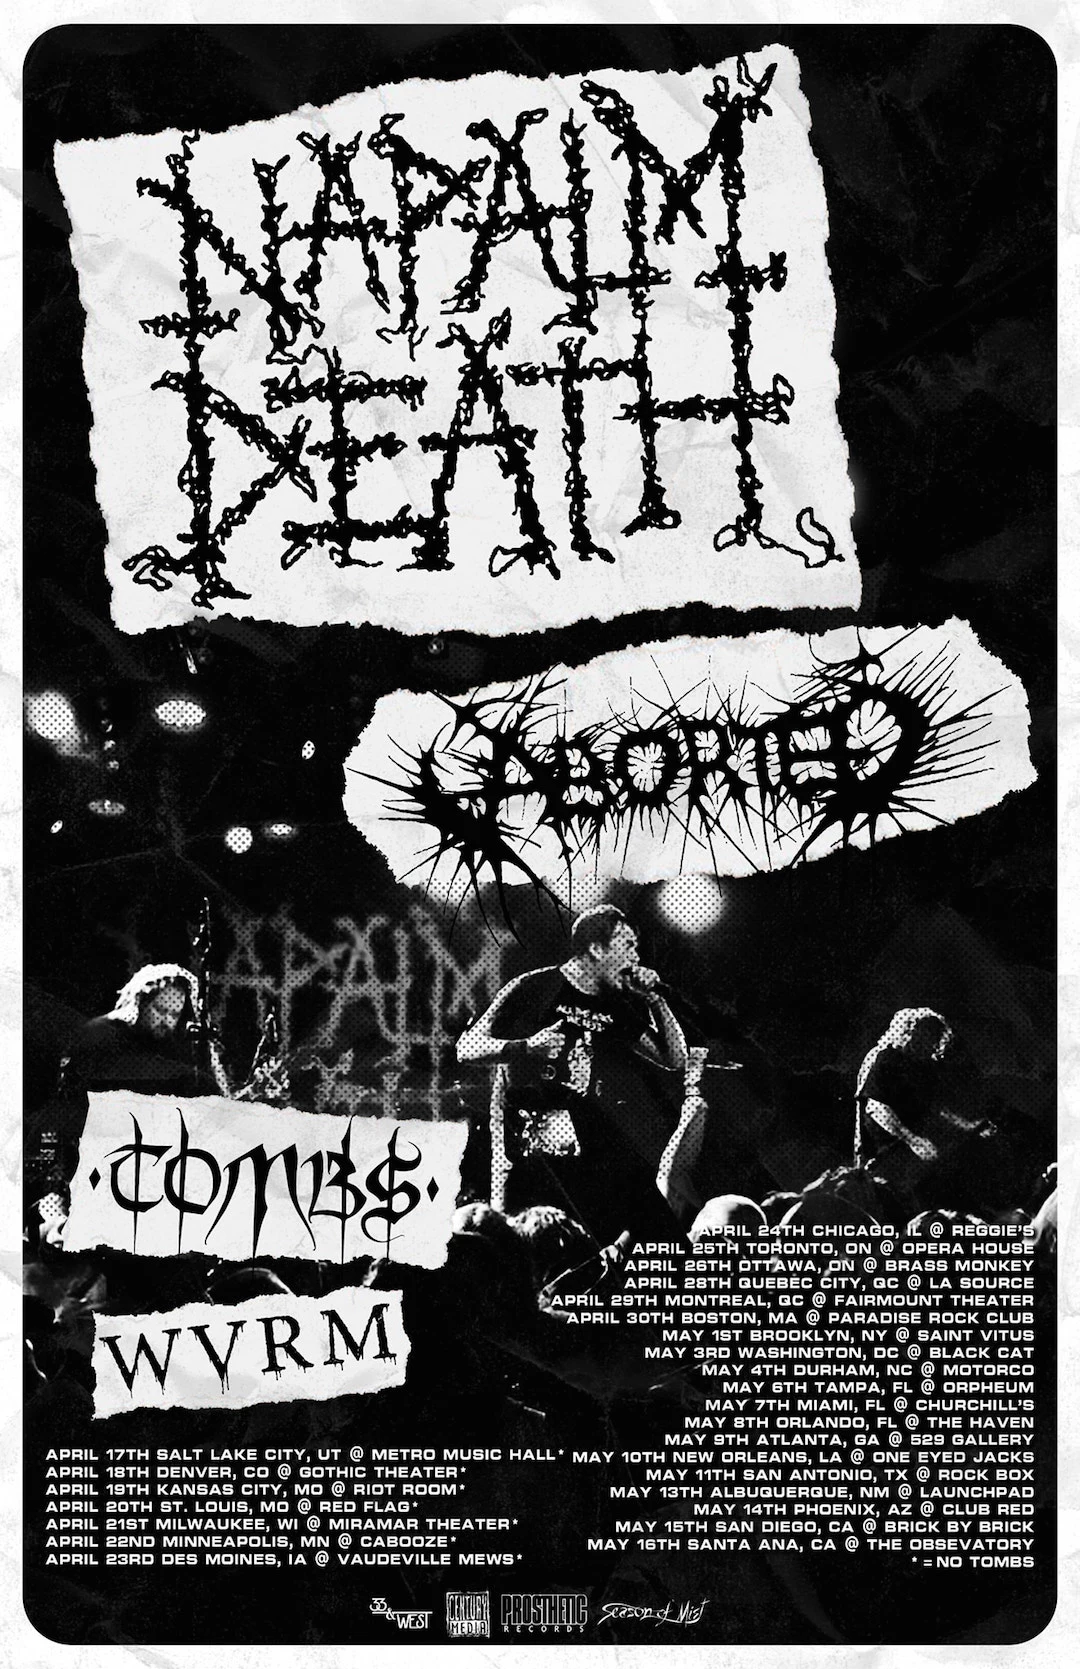 Napalm Death Book North American Tour With Aborted, Tombs + Wvrm